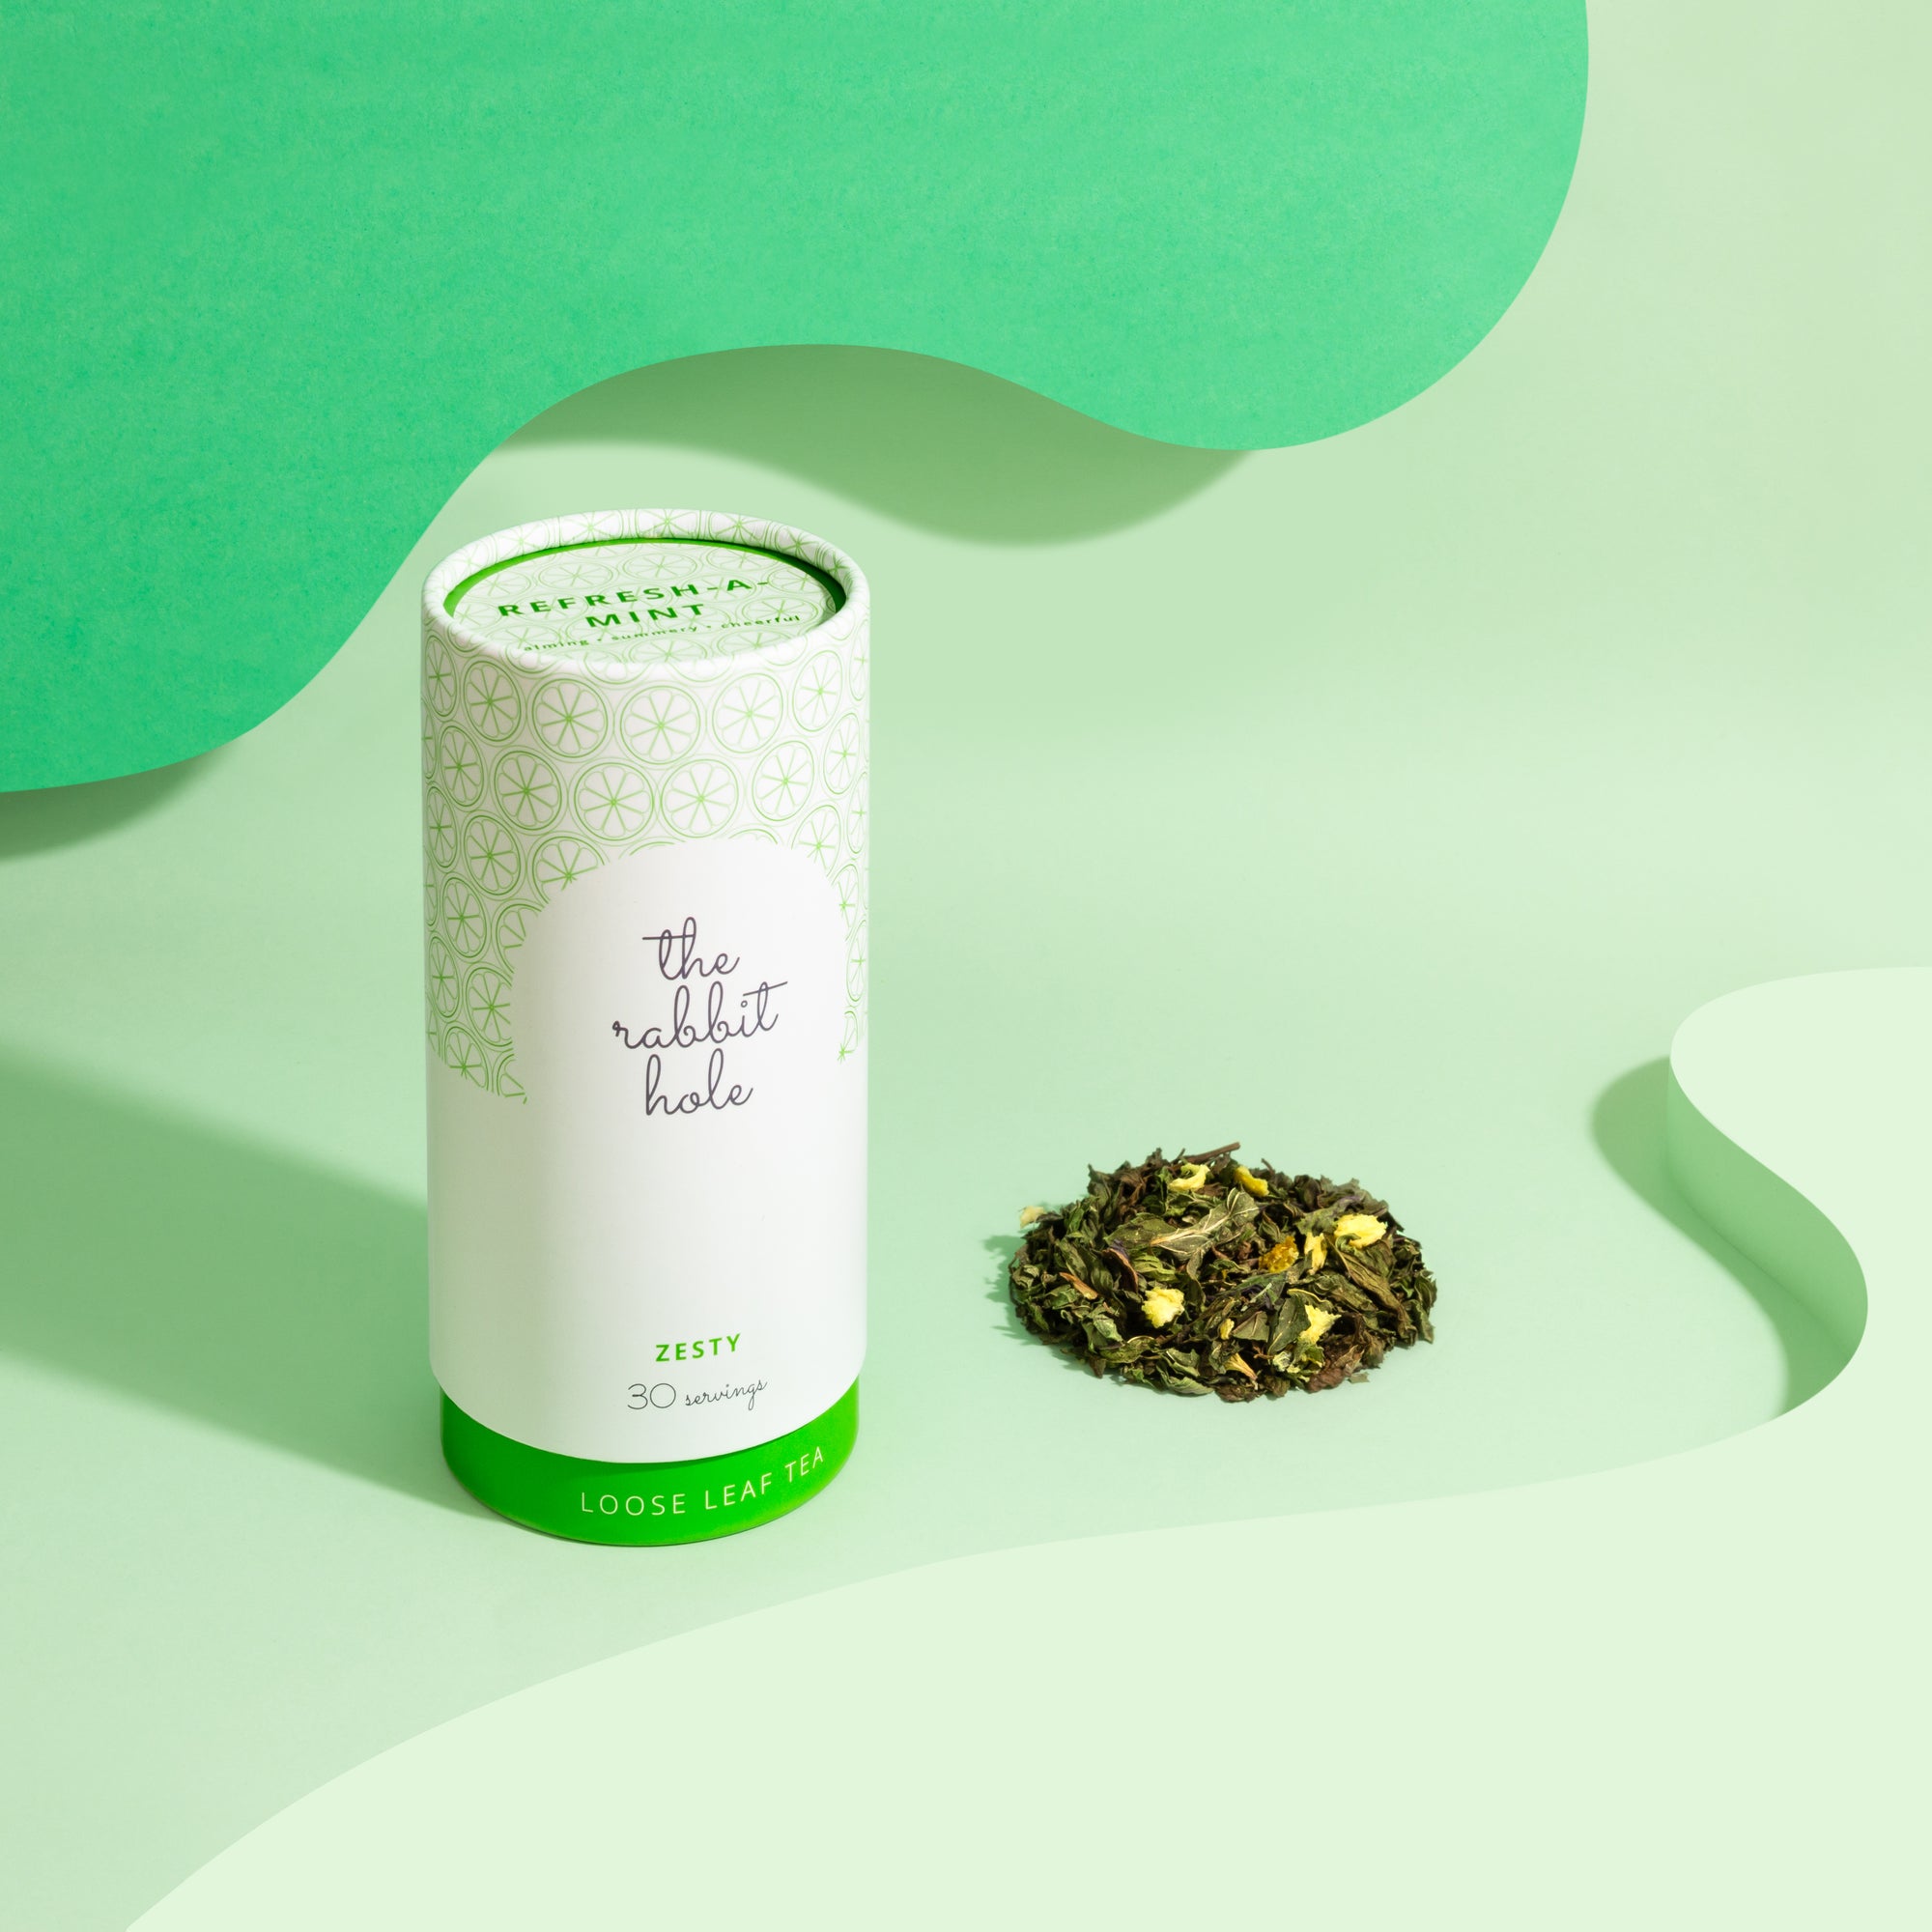 Refresh-a-mint loose leaf tea by The Rabbit Hole - Australian Made Tea. Tea canister on colourful green background